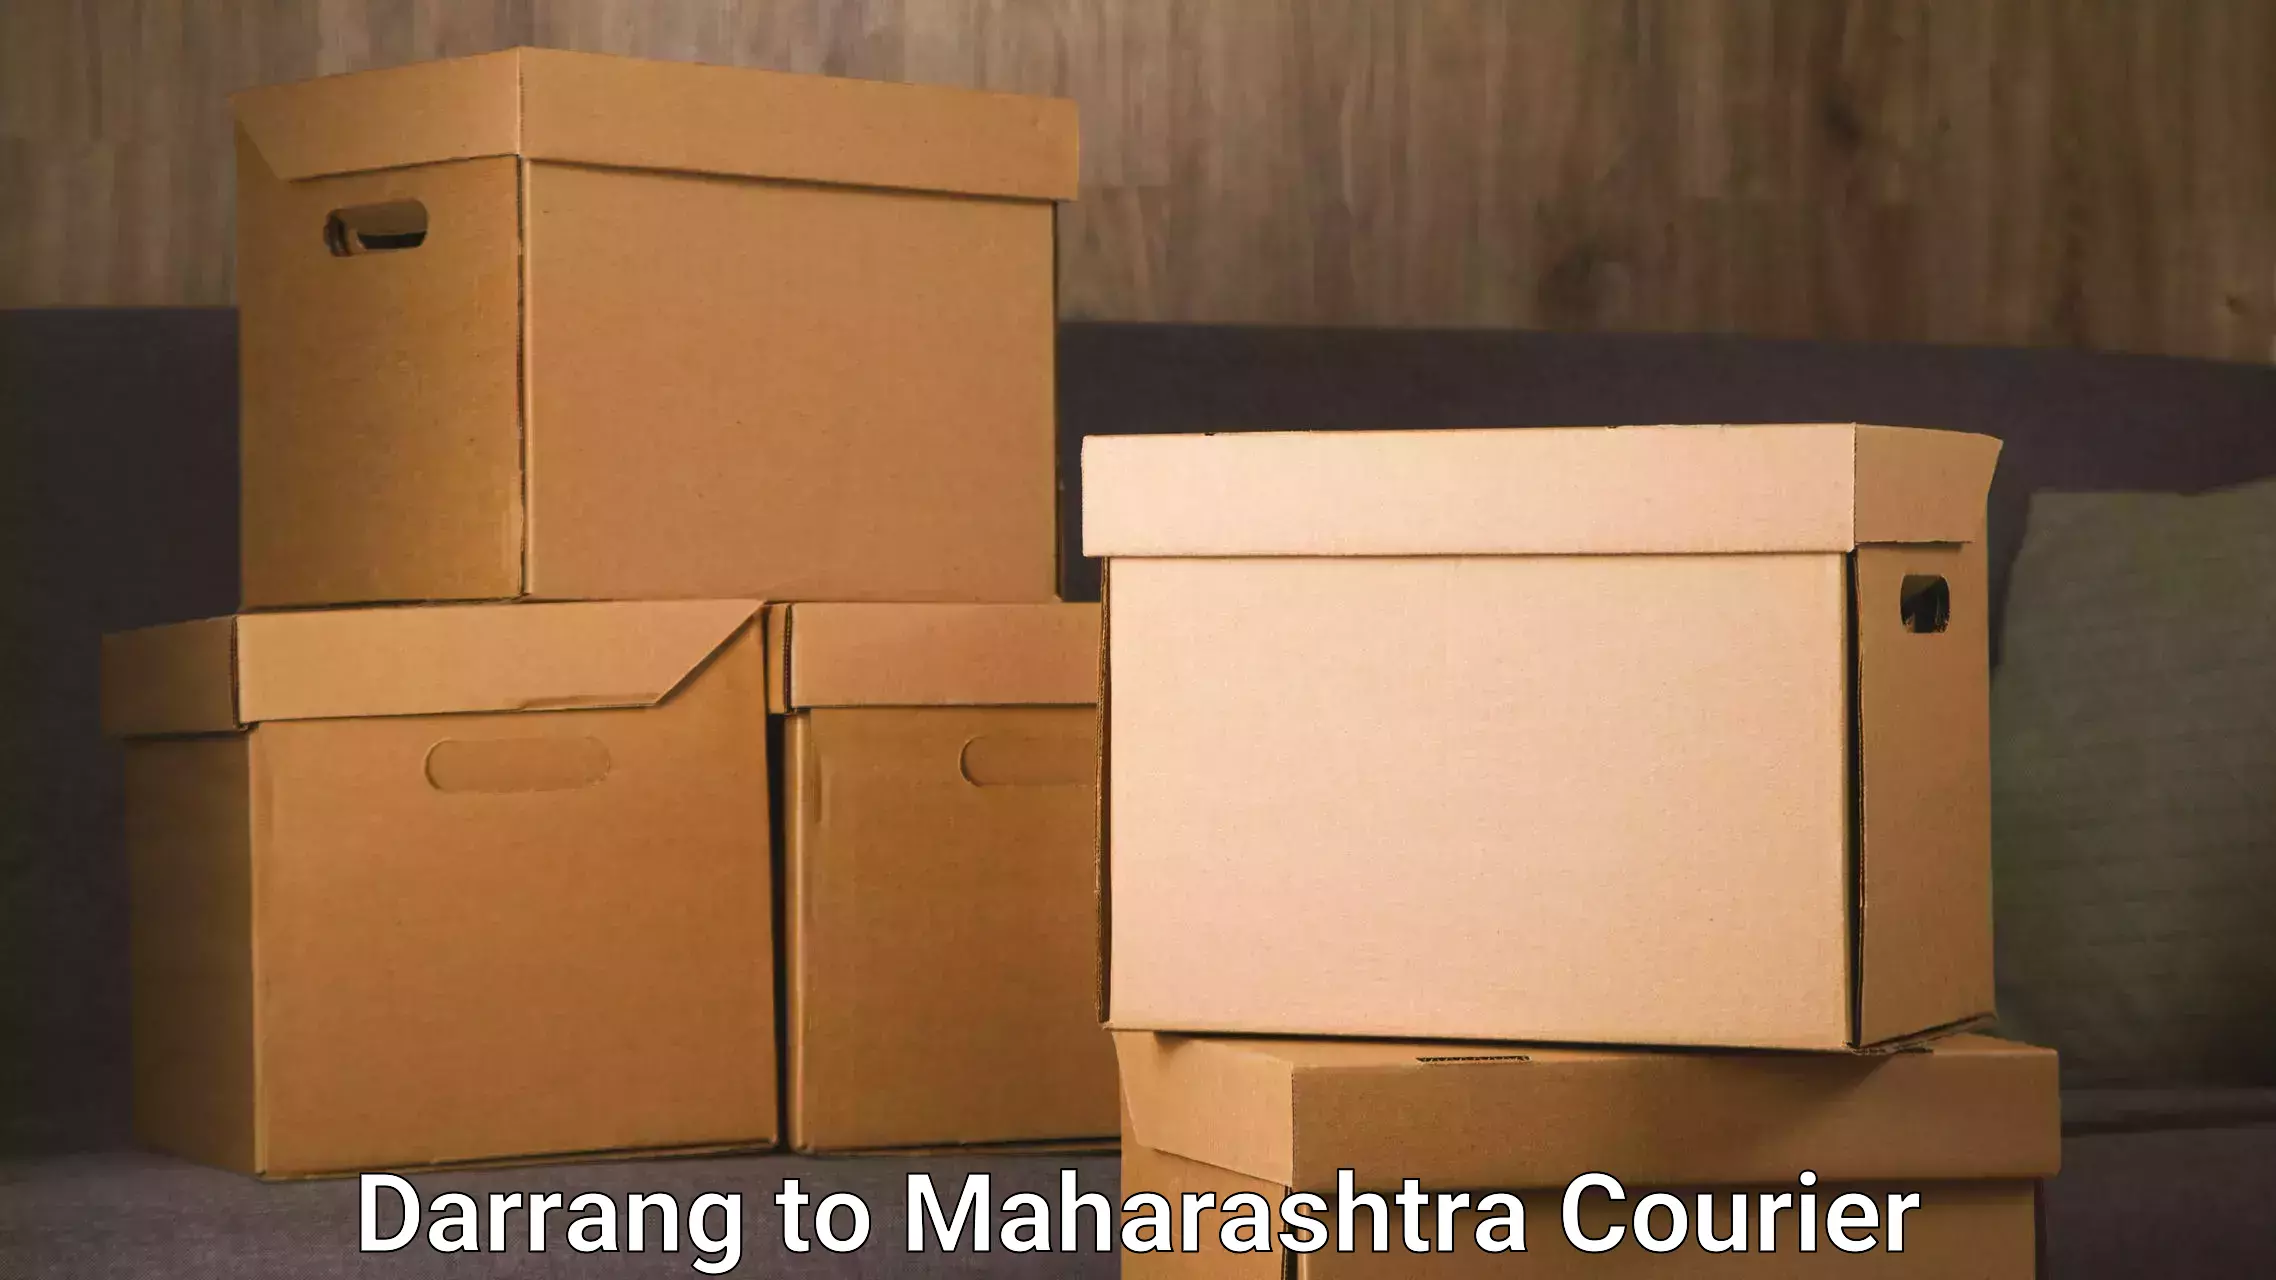 24-hour delivery options Darrang to Lonavala